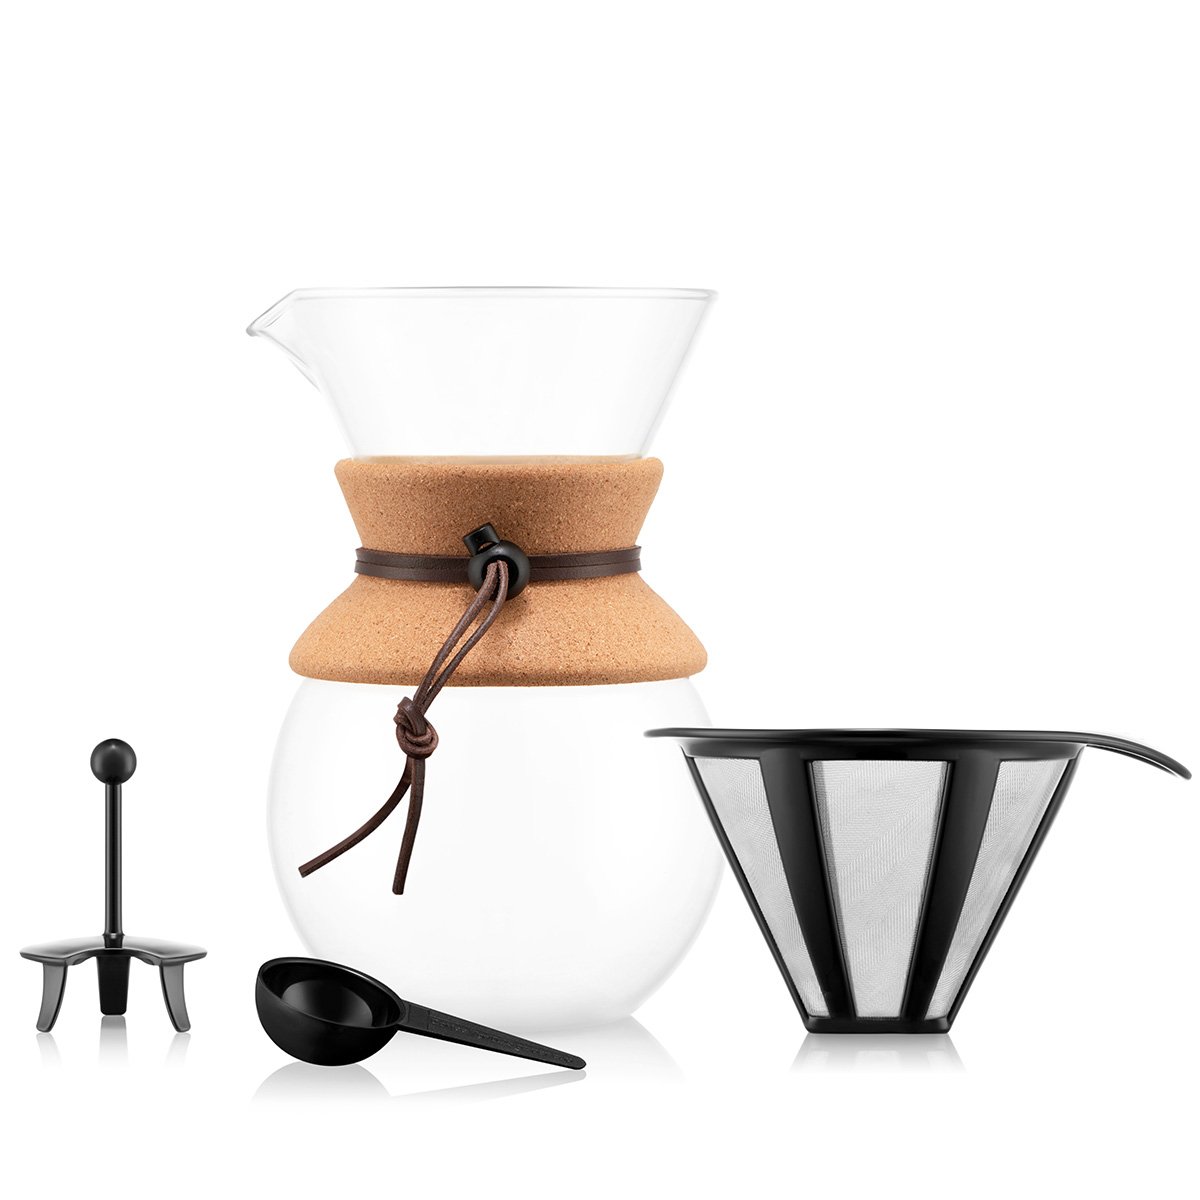 Bodum Pour Over (6 stores) find prices • Compare today »